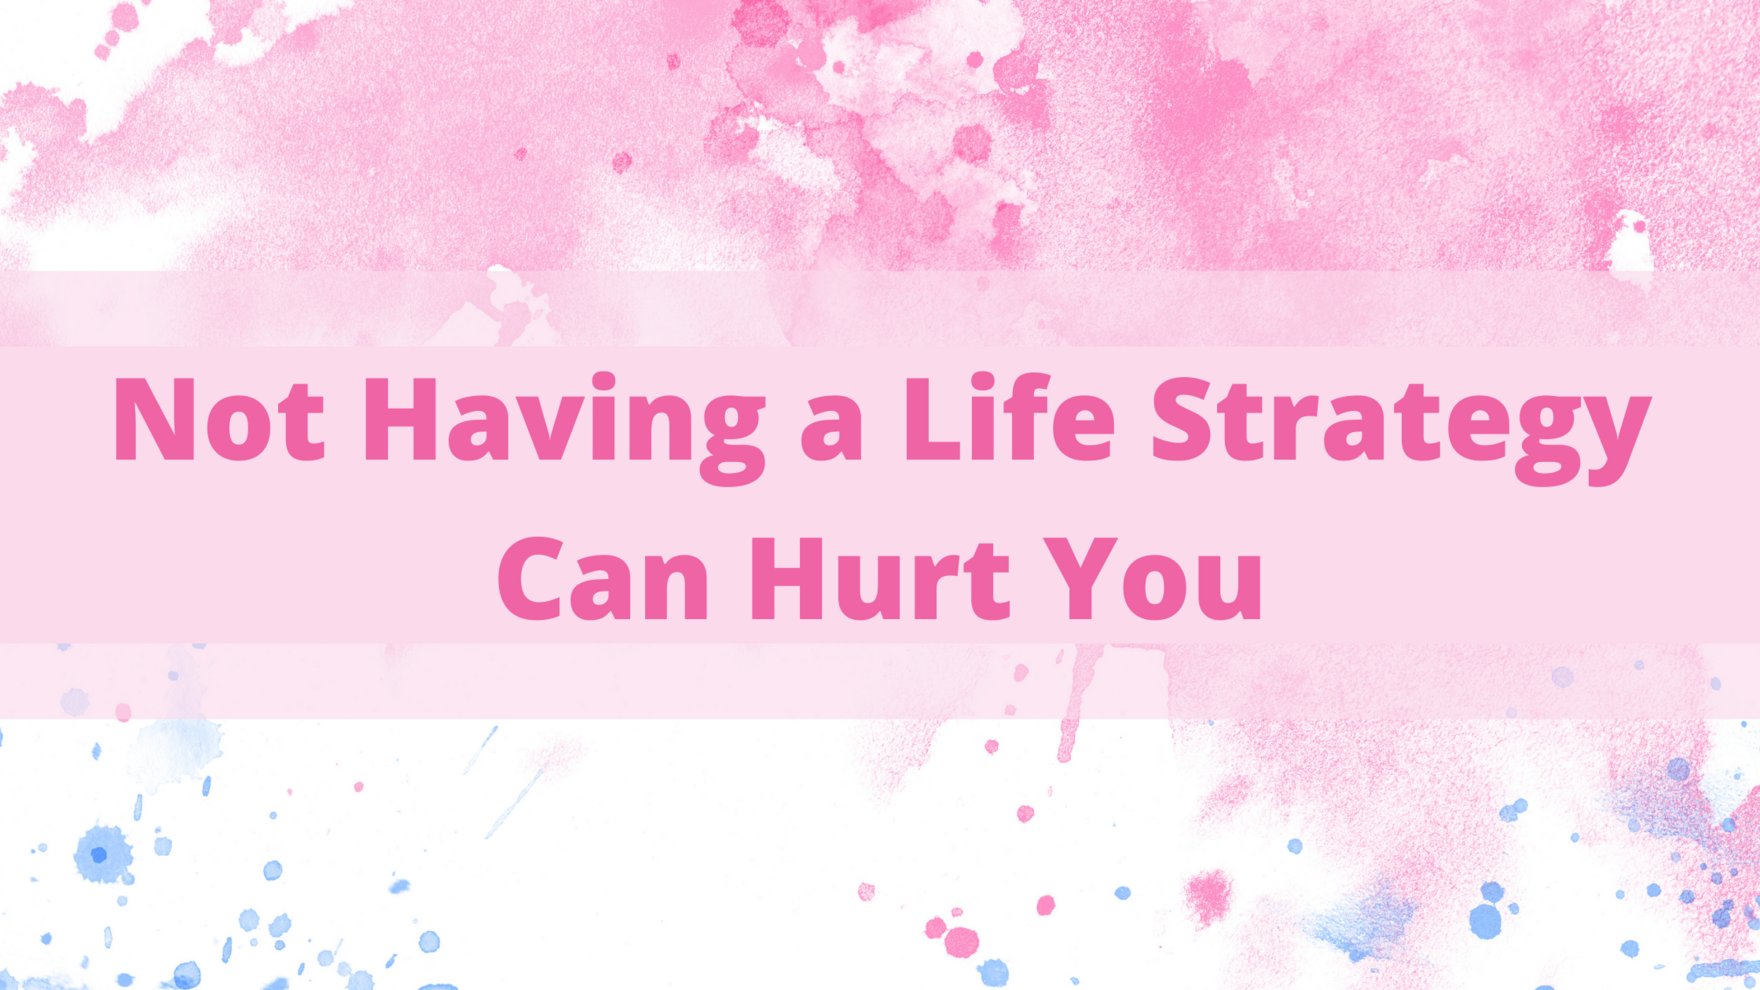 Blog - Strategic Life - Not Having a Life Strategy Can Hurt You